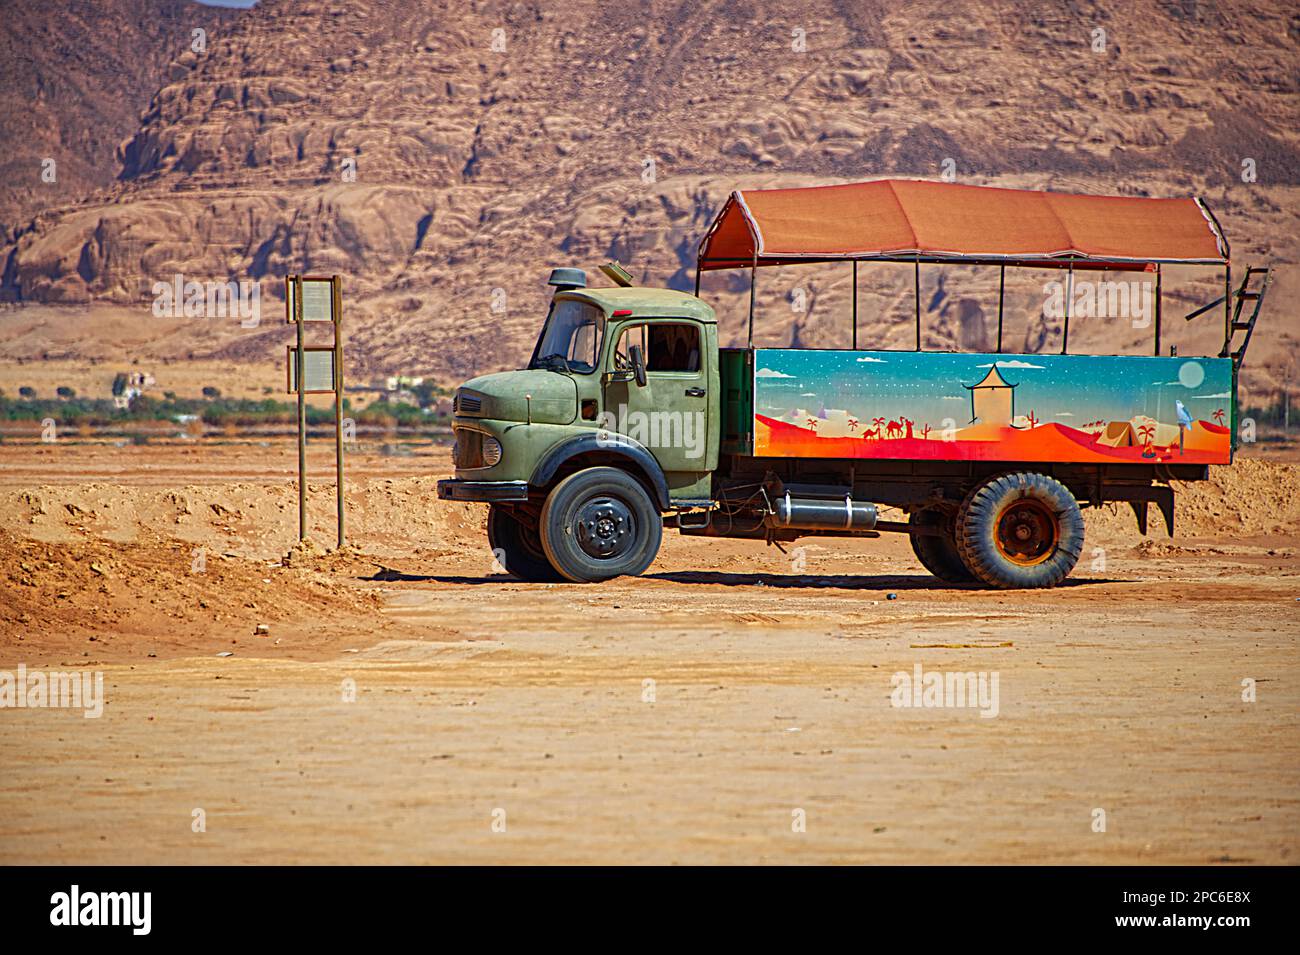 An old and rusty truck in various colors parked in the desert Stock Photo